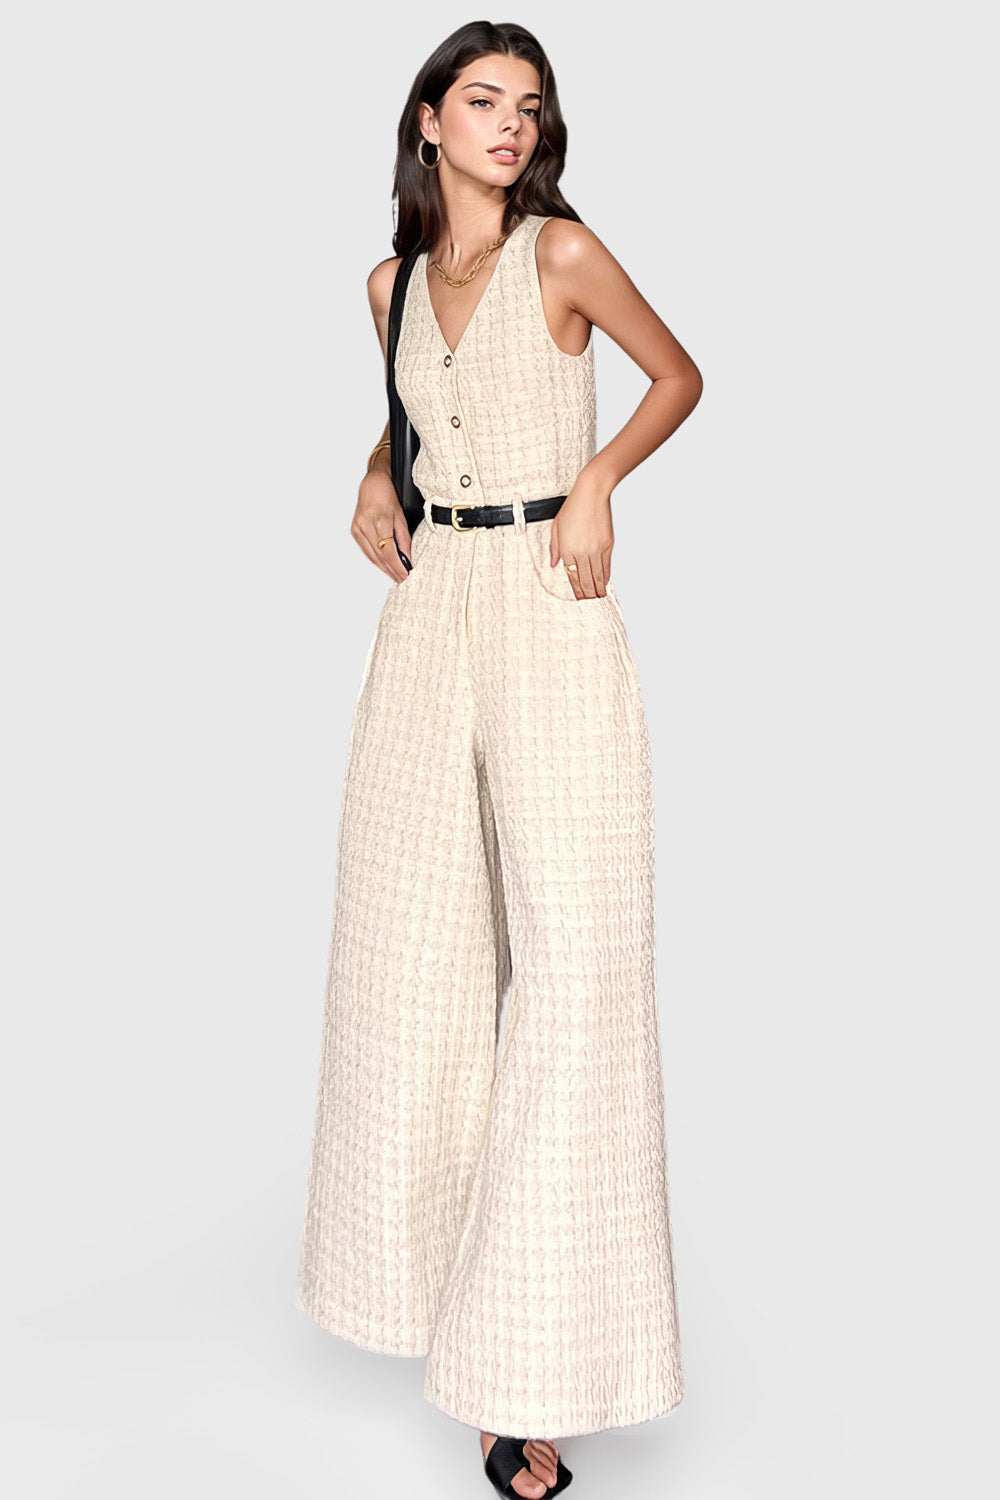 Textured 2-Piece Set with Jumpsuit and Short Jacket - White